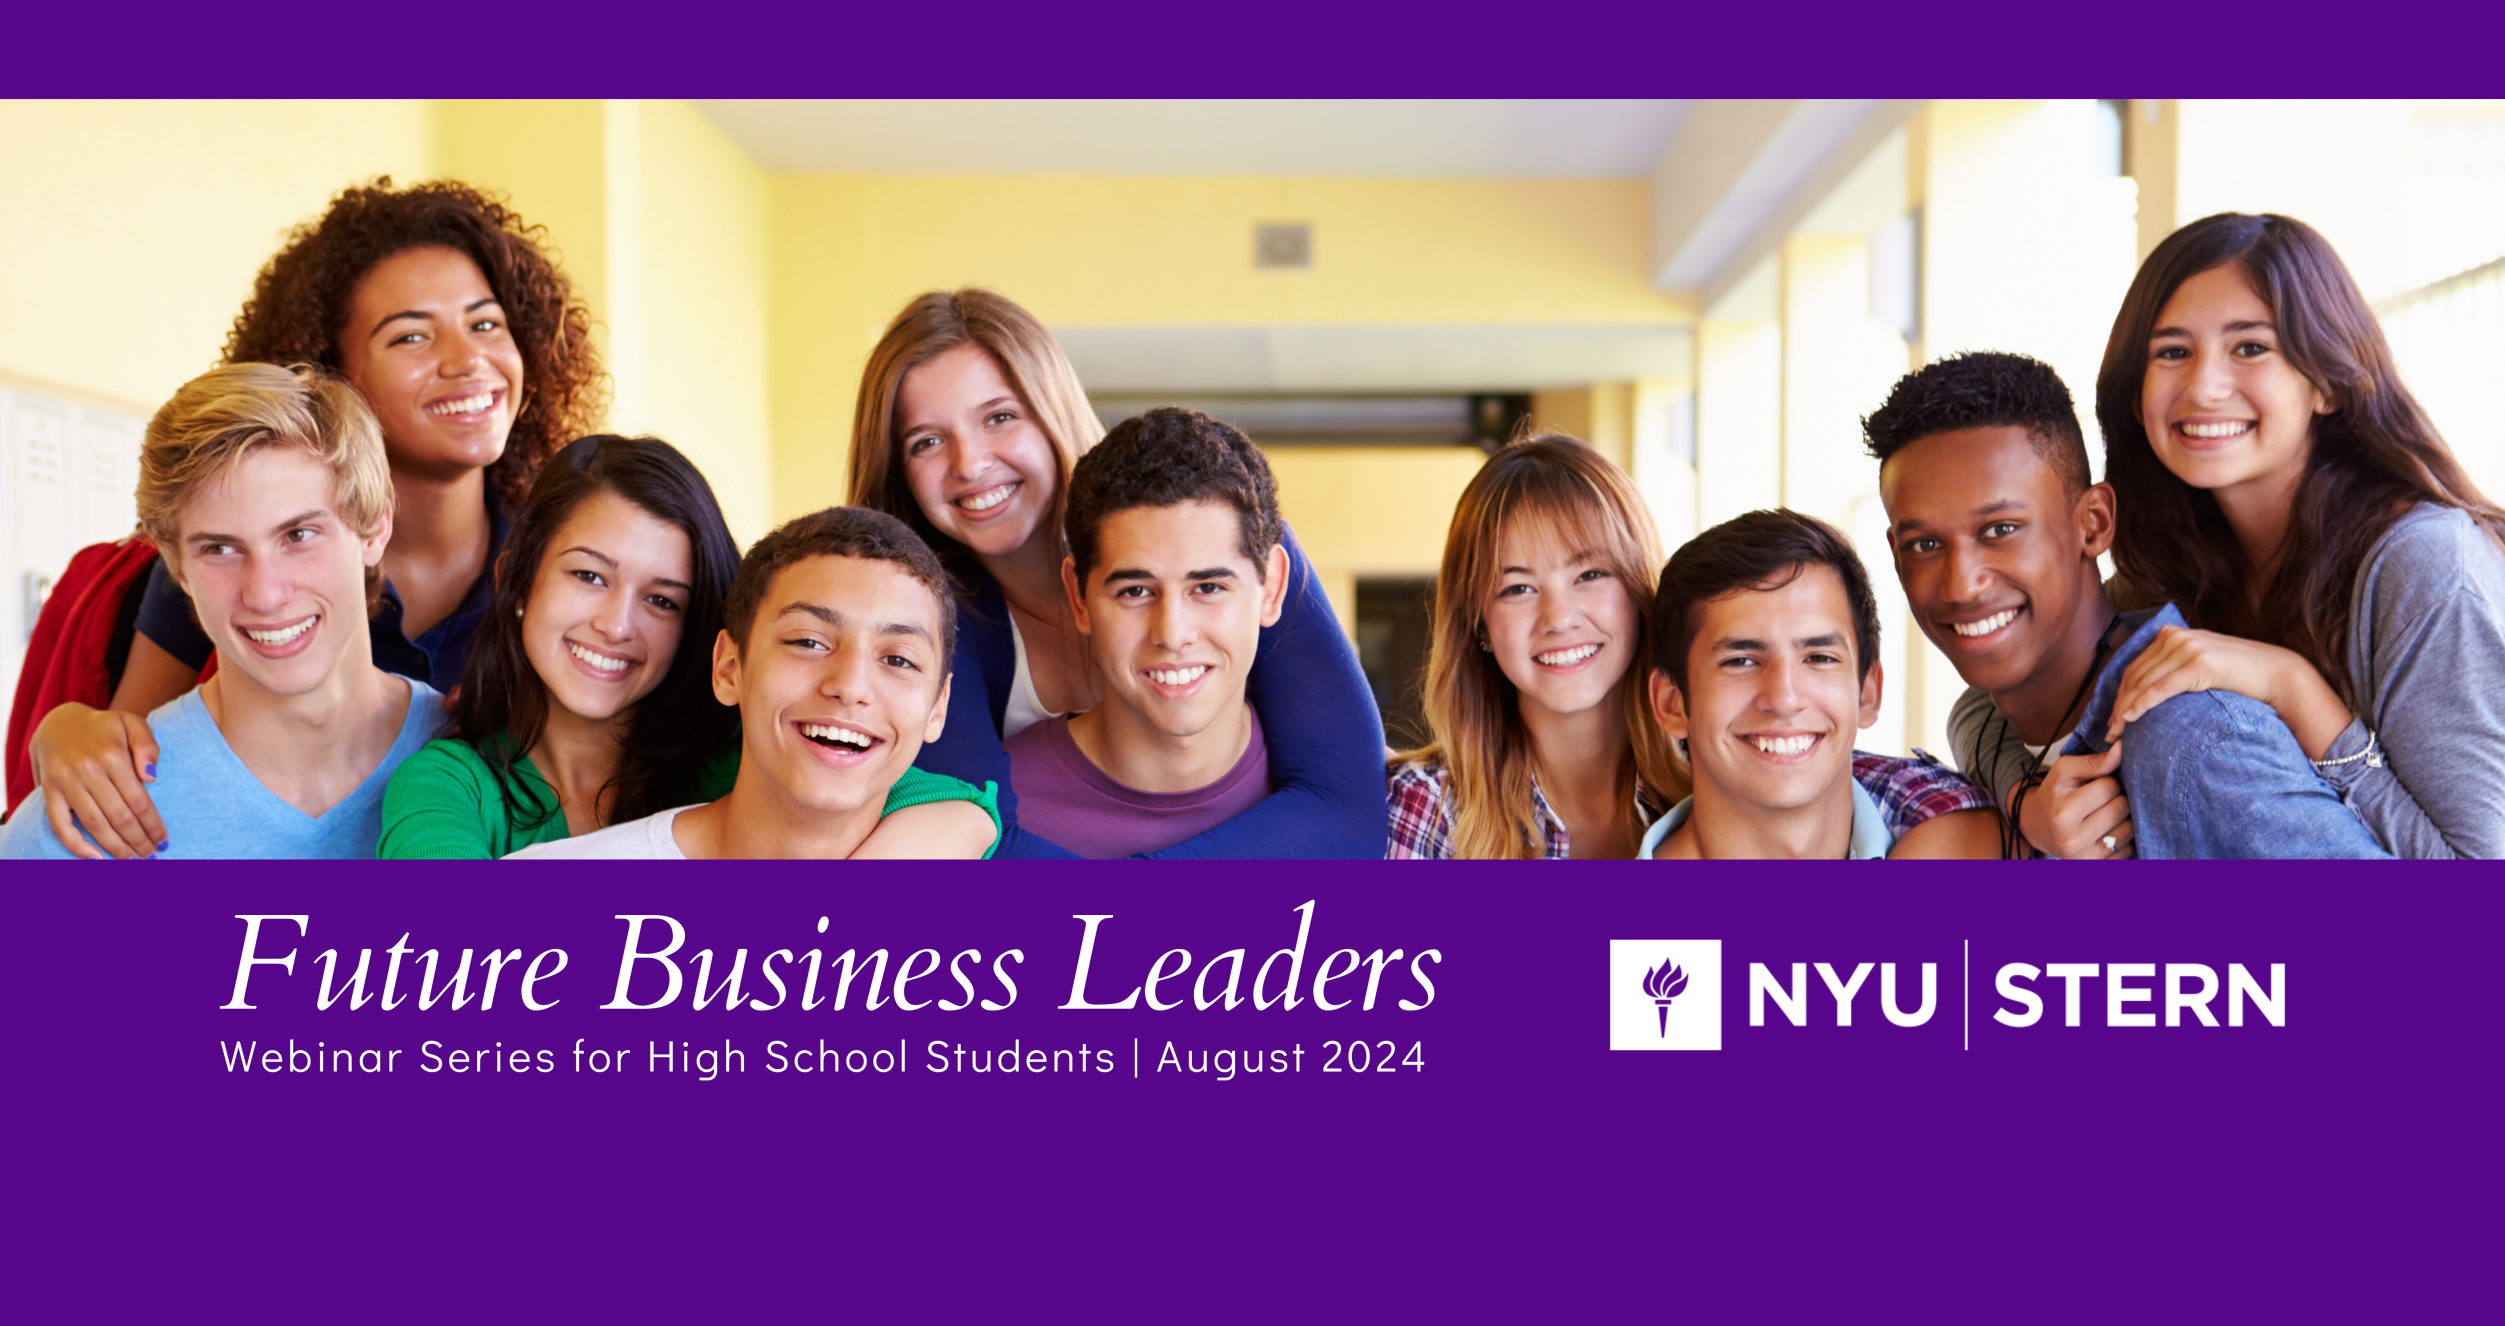 Future Business Leaders Webinar Series for High School Students August 2024 at NYU Stern